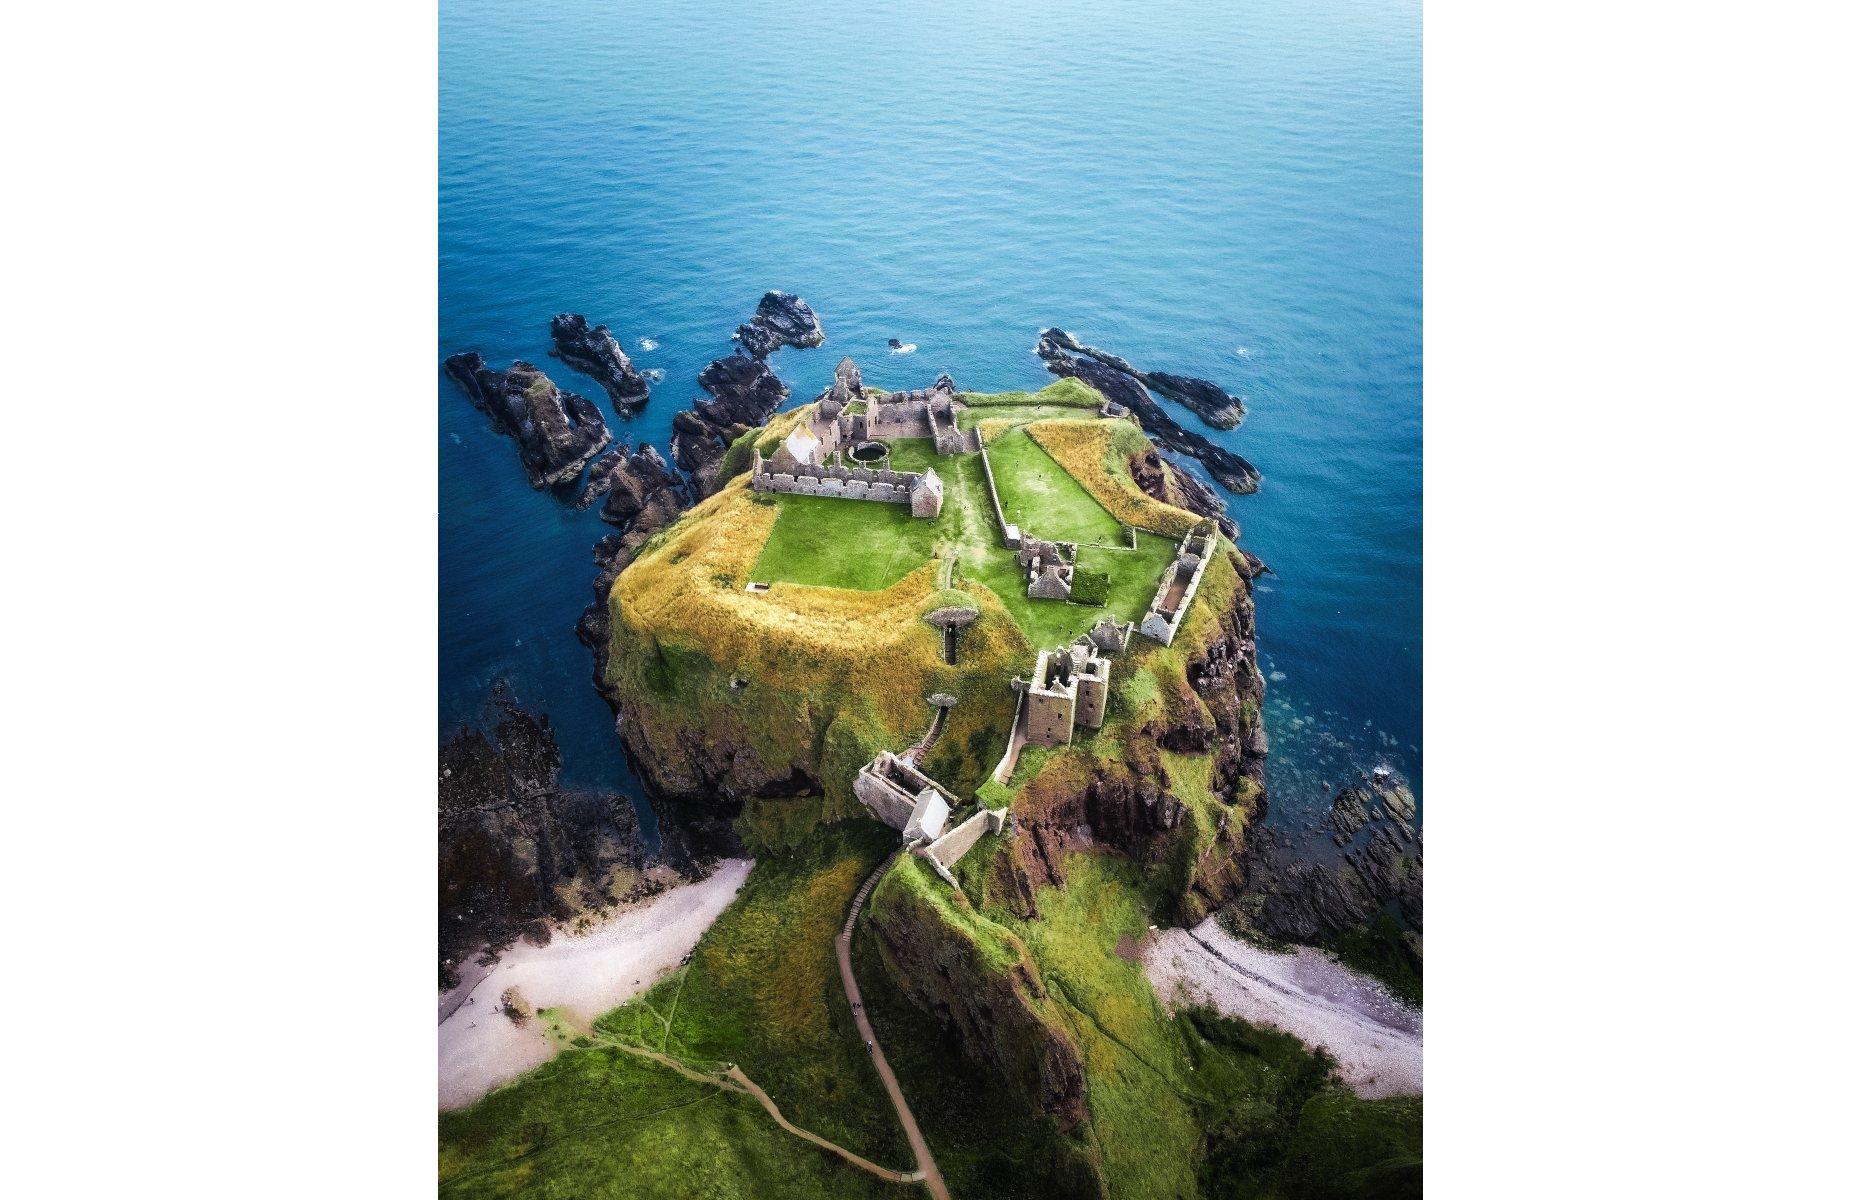 Ingenious aerial photography, courtesy of Verginia Hristova, reveals the combination of rugged natural beauty and historic architecture in this impressive image of Dunnottar Castle. The monument, which perches on a remote 160-foot (49m) cliff above the North Sea, was built in the 13th century and has been used by some of Scotland's greatest historical figures over the years, including Mary Queen of Scots and William Wallace.